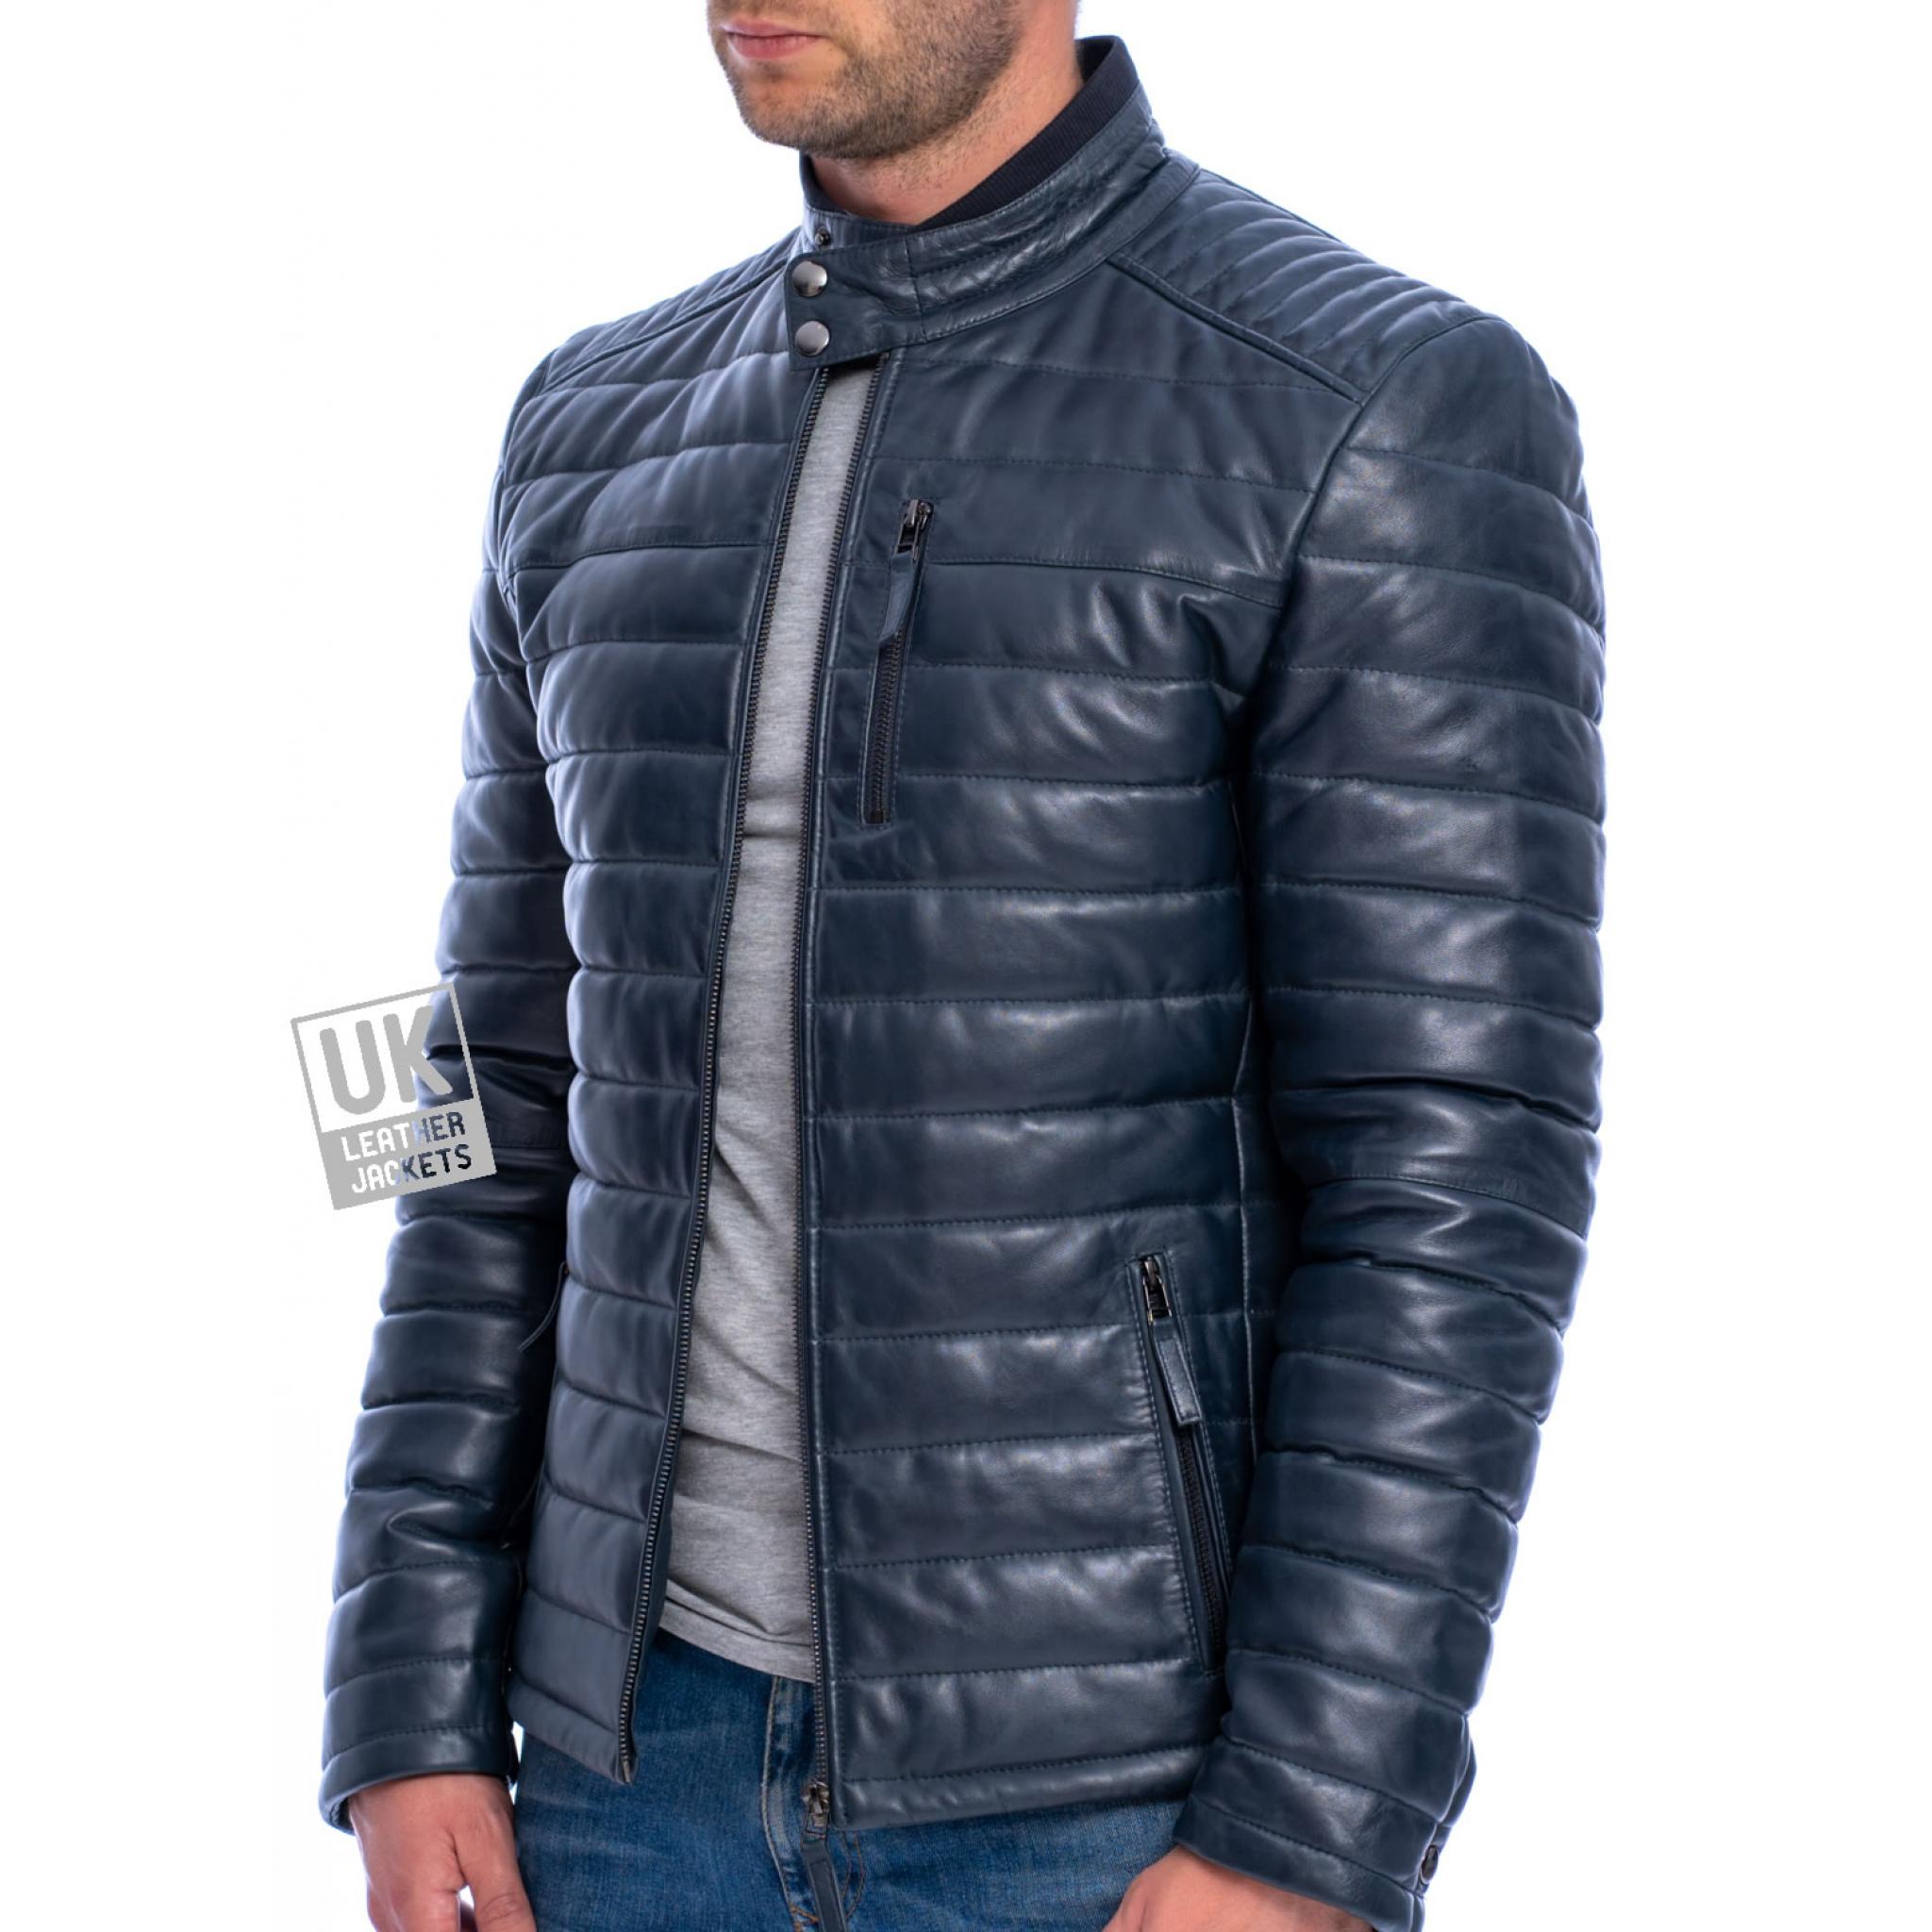 Mens Navy Blue Leather Jacket - Ultra Light Quilted | UK Leather Jackets